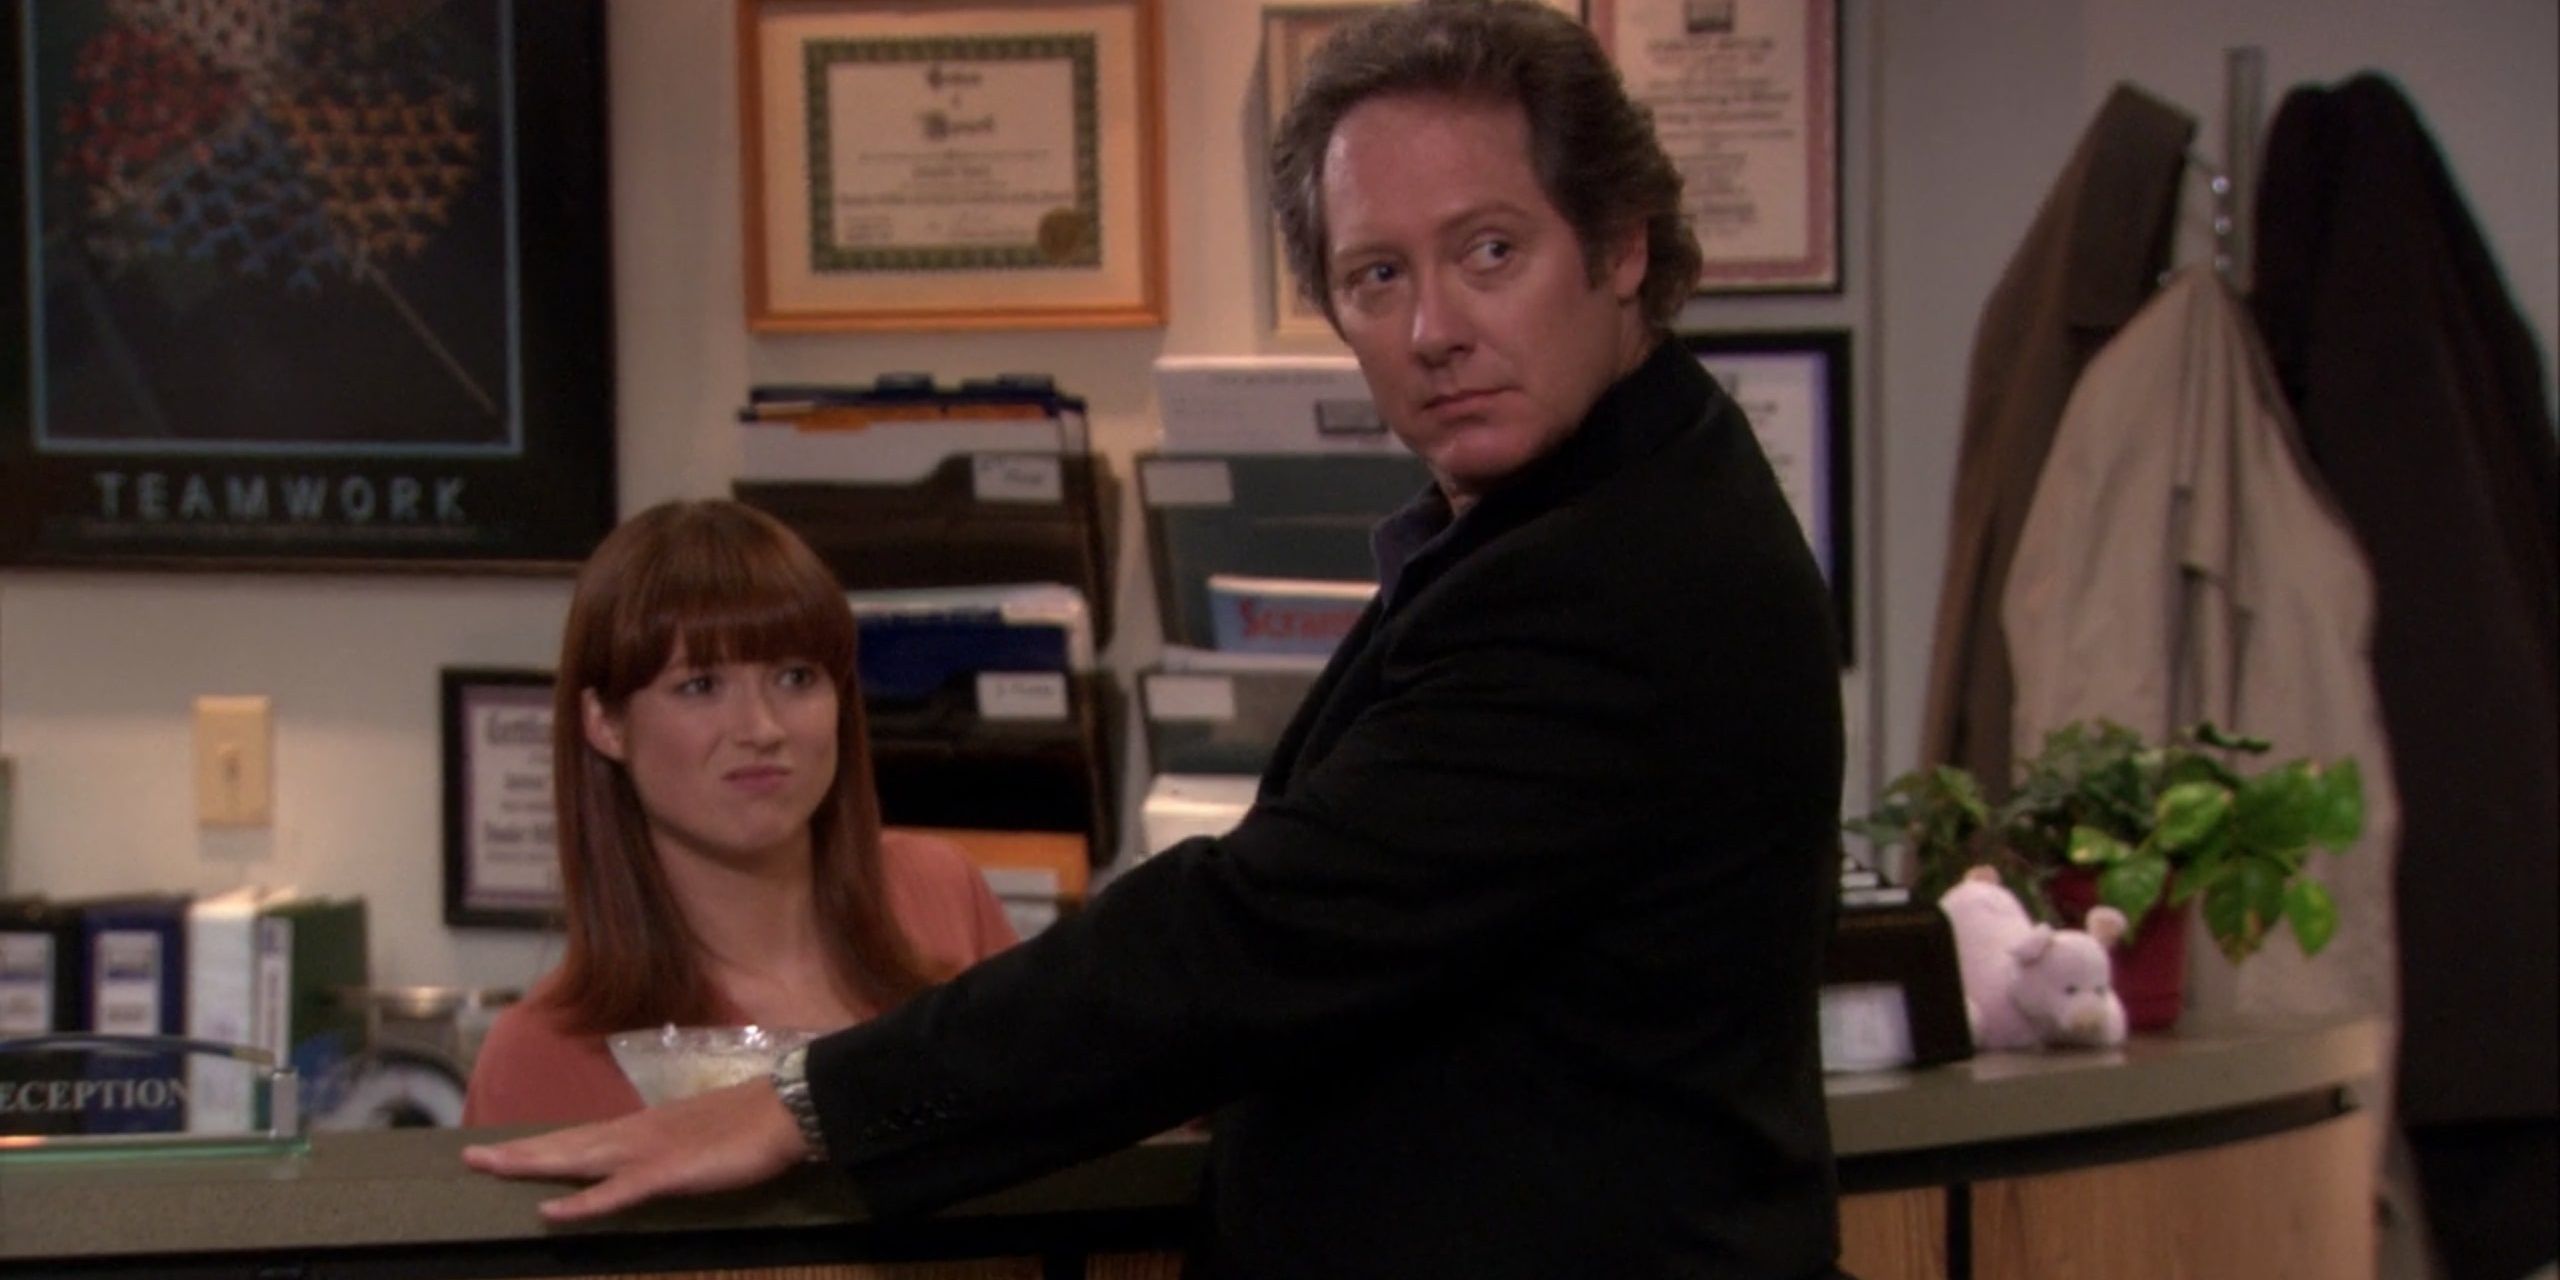 Robert speaks to Erin at the reception desk in The Office